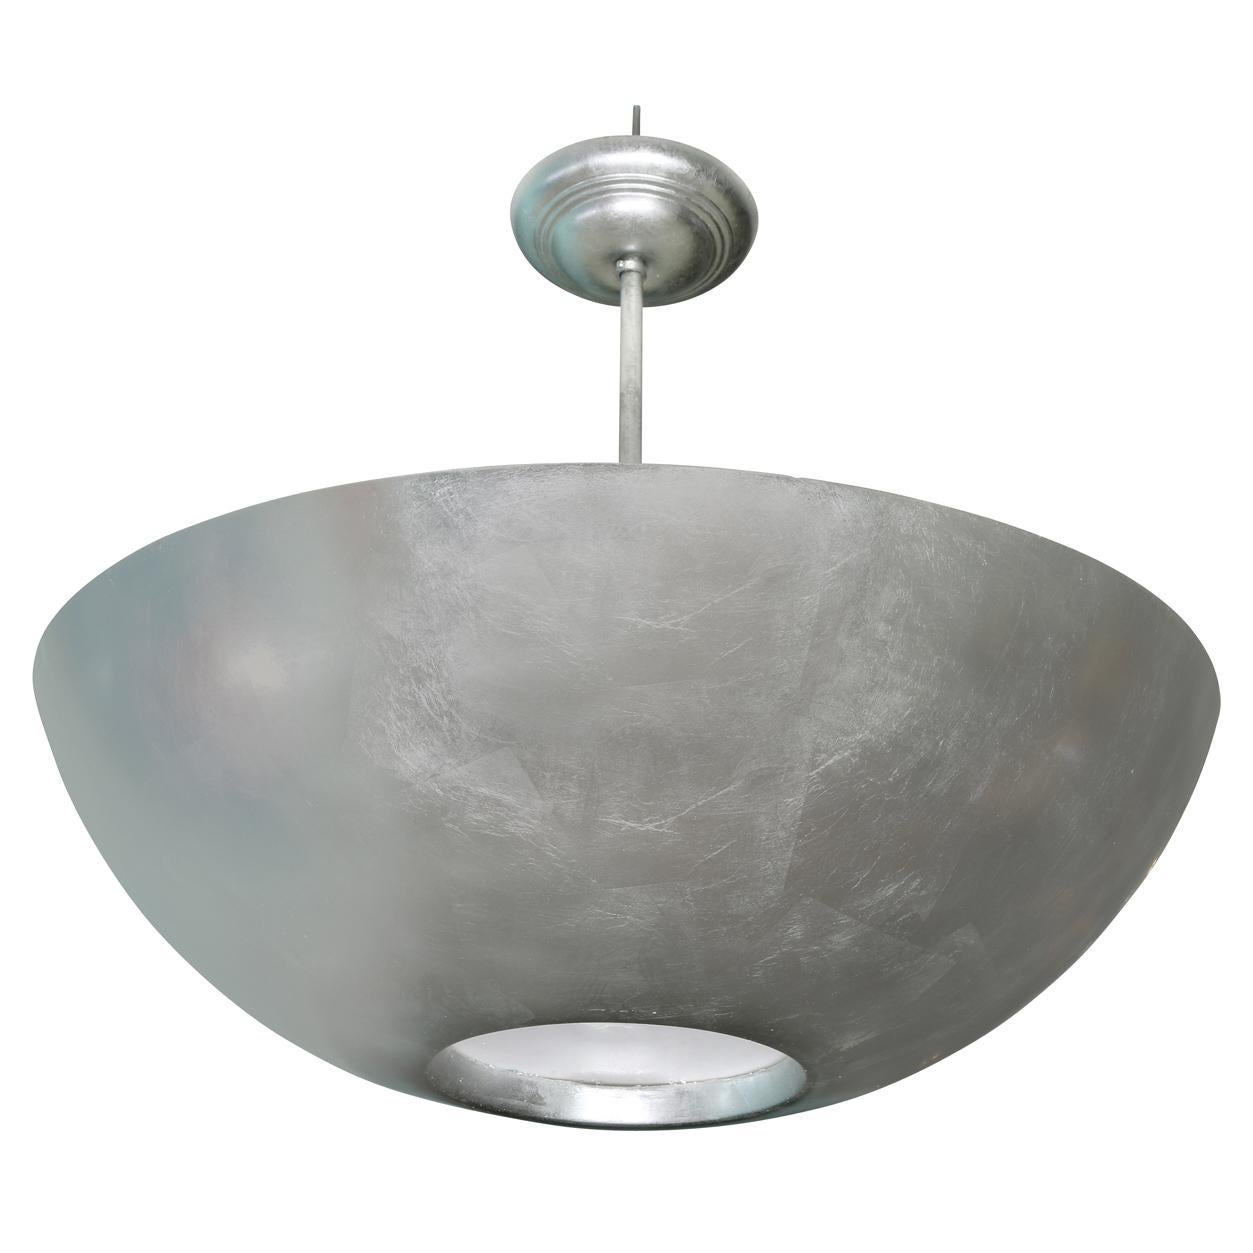 A large vintage plafonnier in modern style with an inverted half dome shape, silver leaf finish to resin or fiberglass and a light diffuser at base.